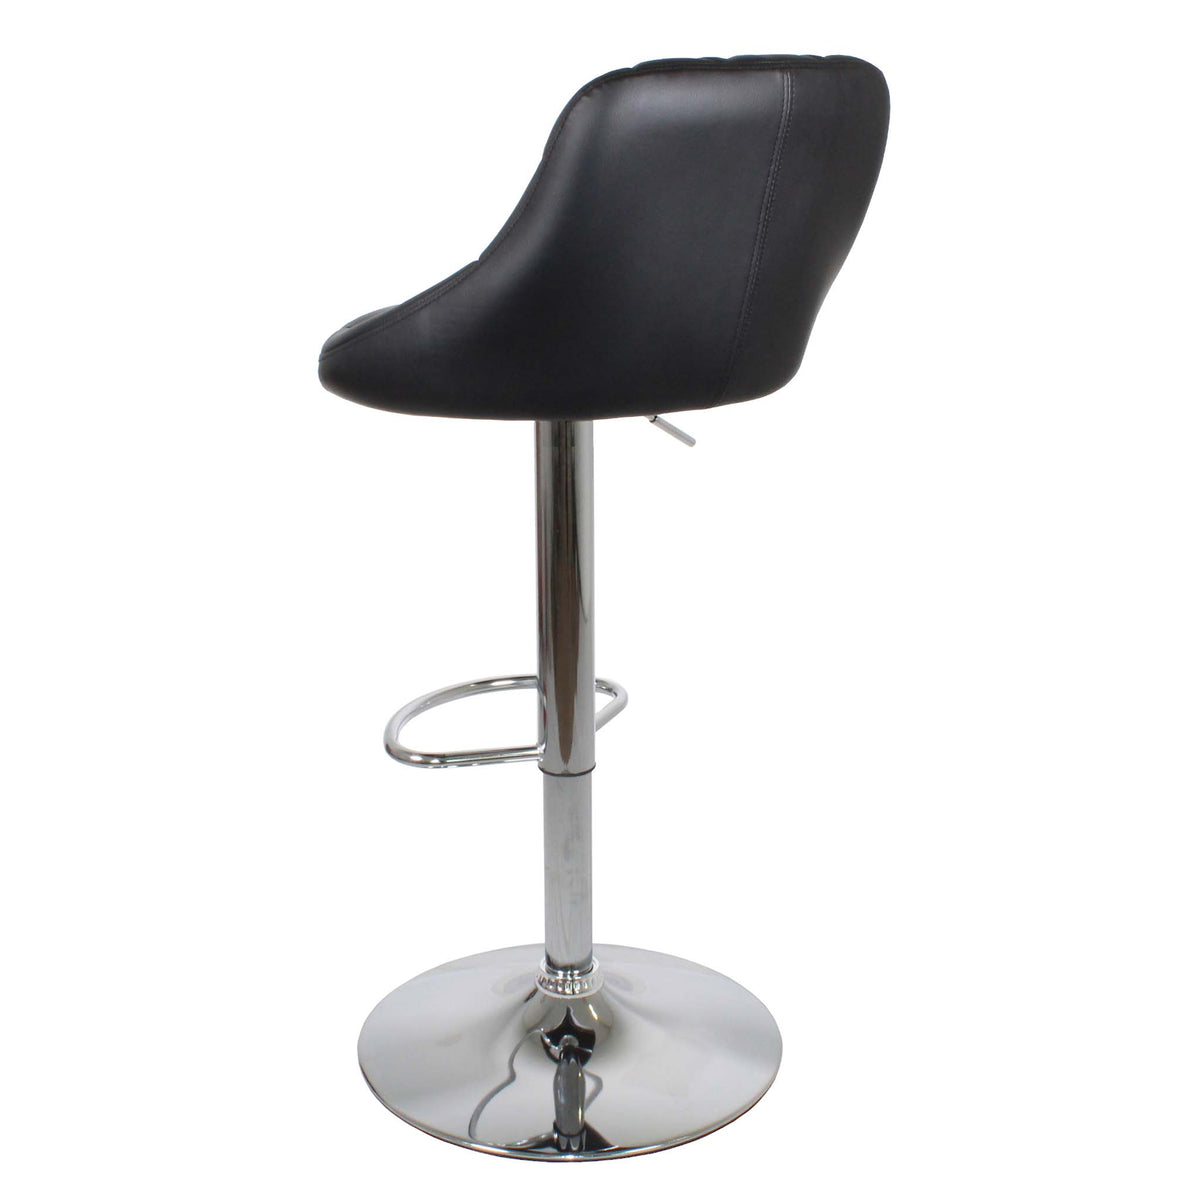 Back view of the Shadow Grey Abberley Adjustable Breakfast Bar Stool from Roseland Furniture